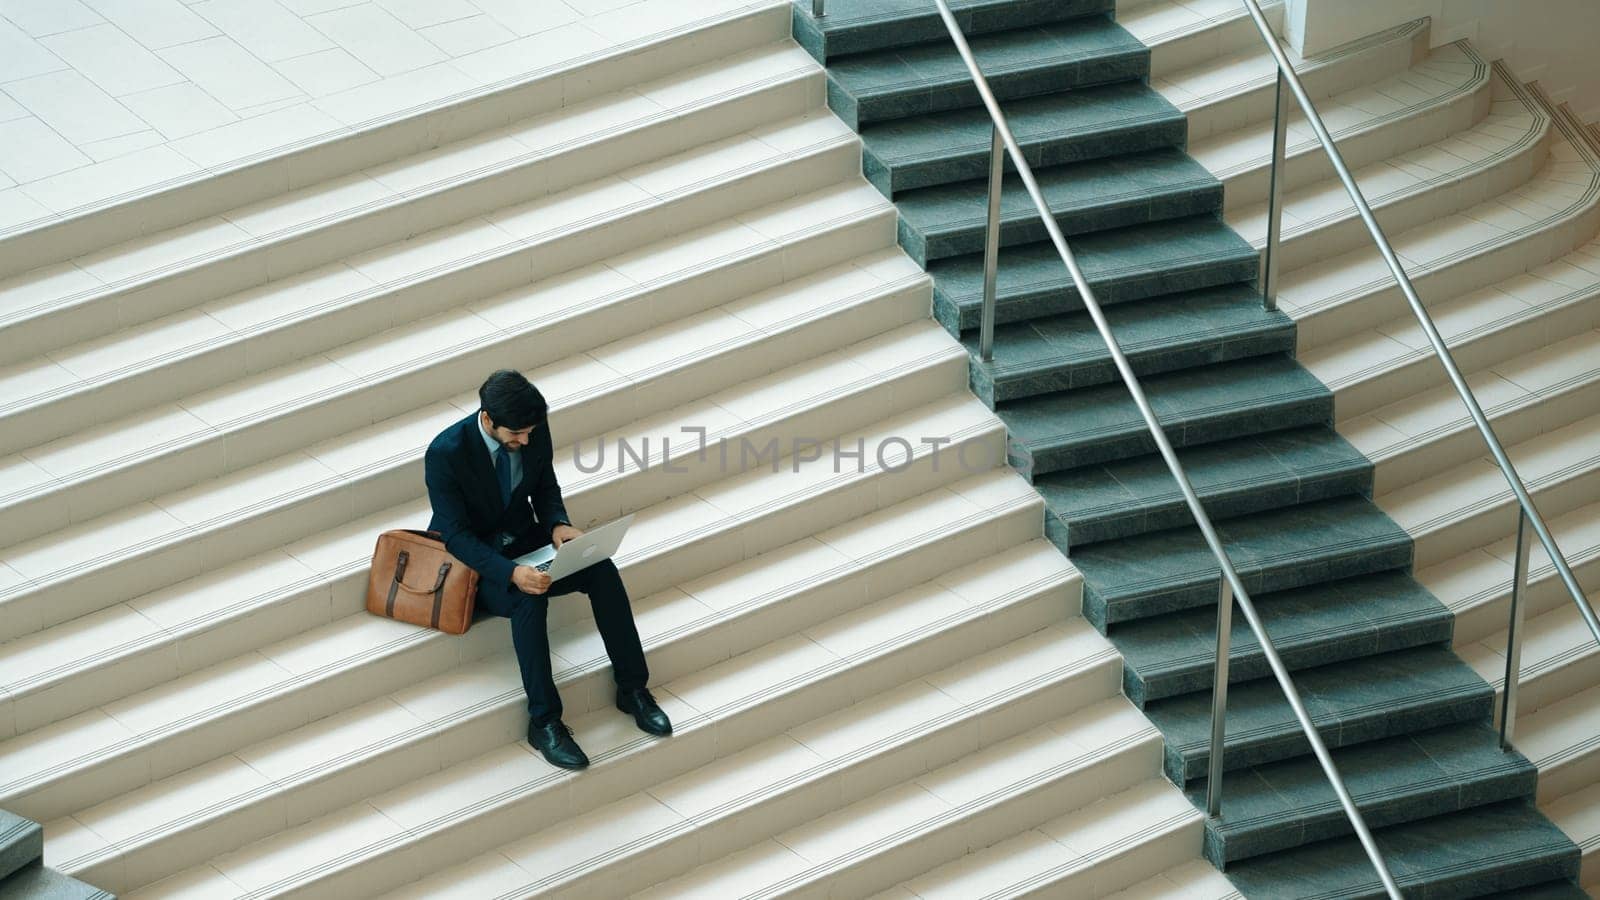 Top view of investor working or planing strategy by using laptop at stair. Professional business man wearing suit while working and typing data analysis by using laptop at modern hotel. Exultant.